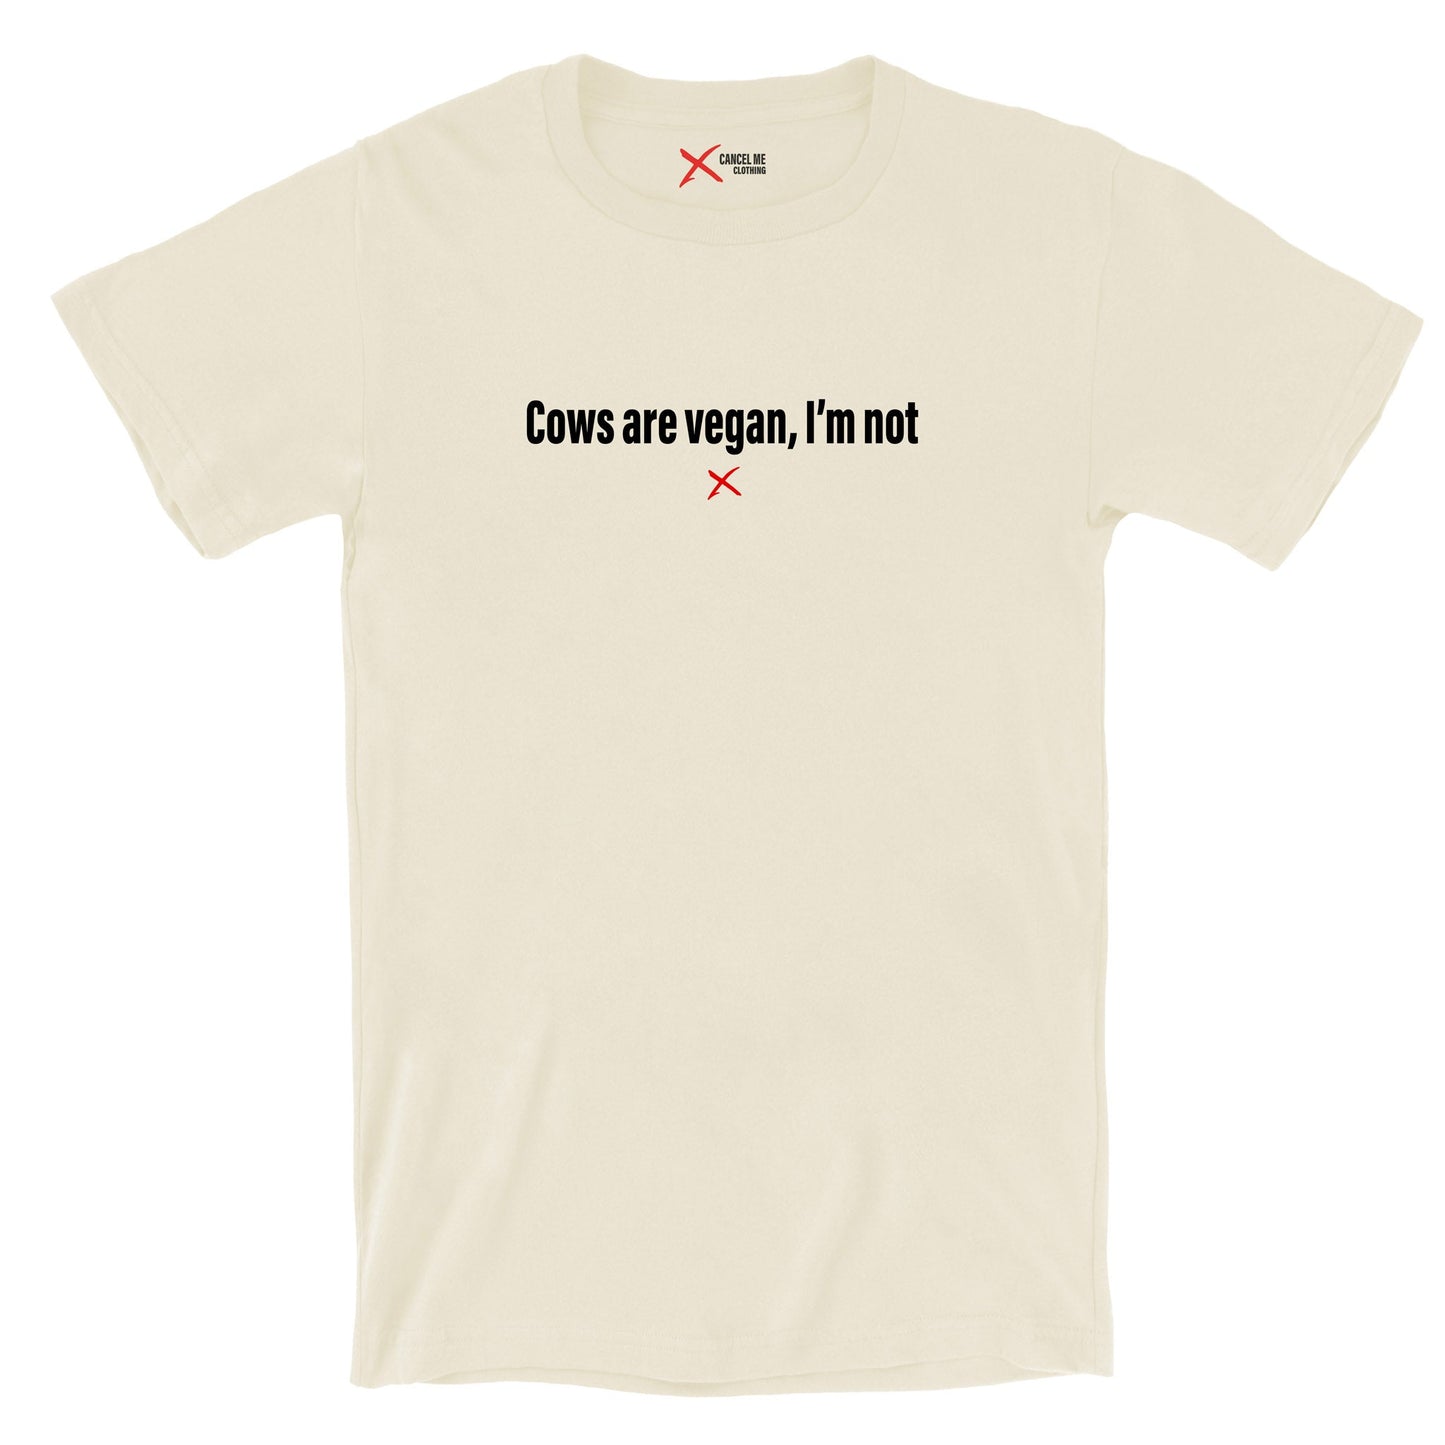 Cows are vegan, I'm not - Shirt